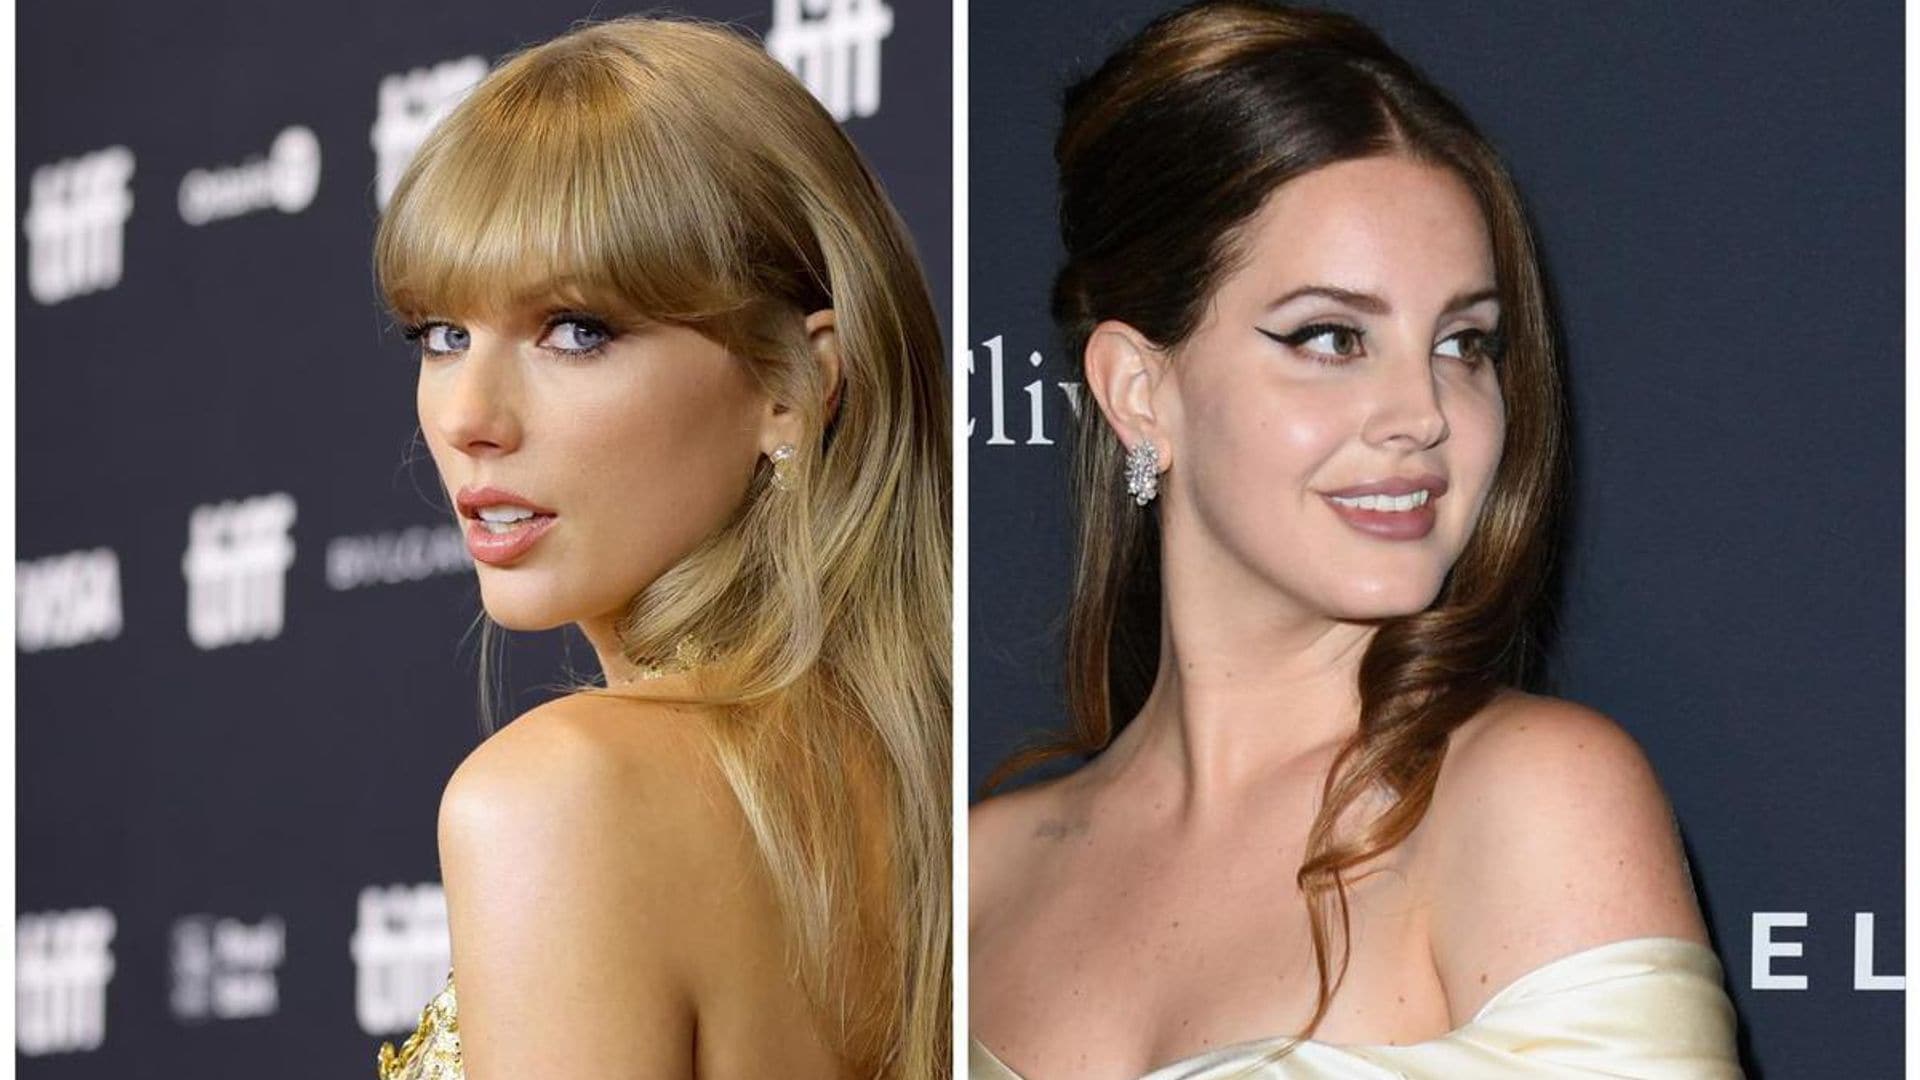 Taylor Swift praises Lana Del Rey for upcoming collaboration: ‘An honor and a privilege’